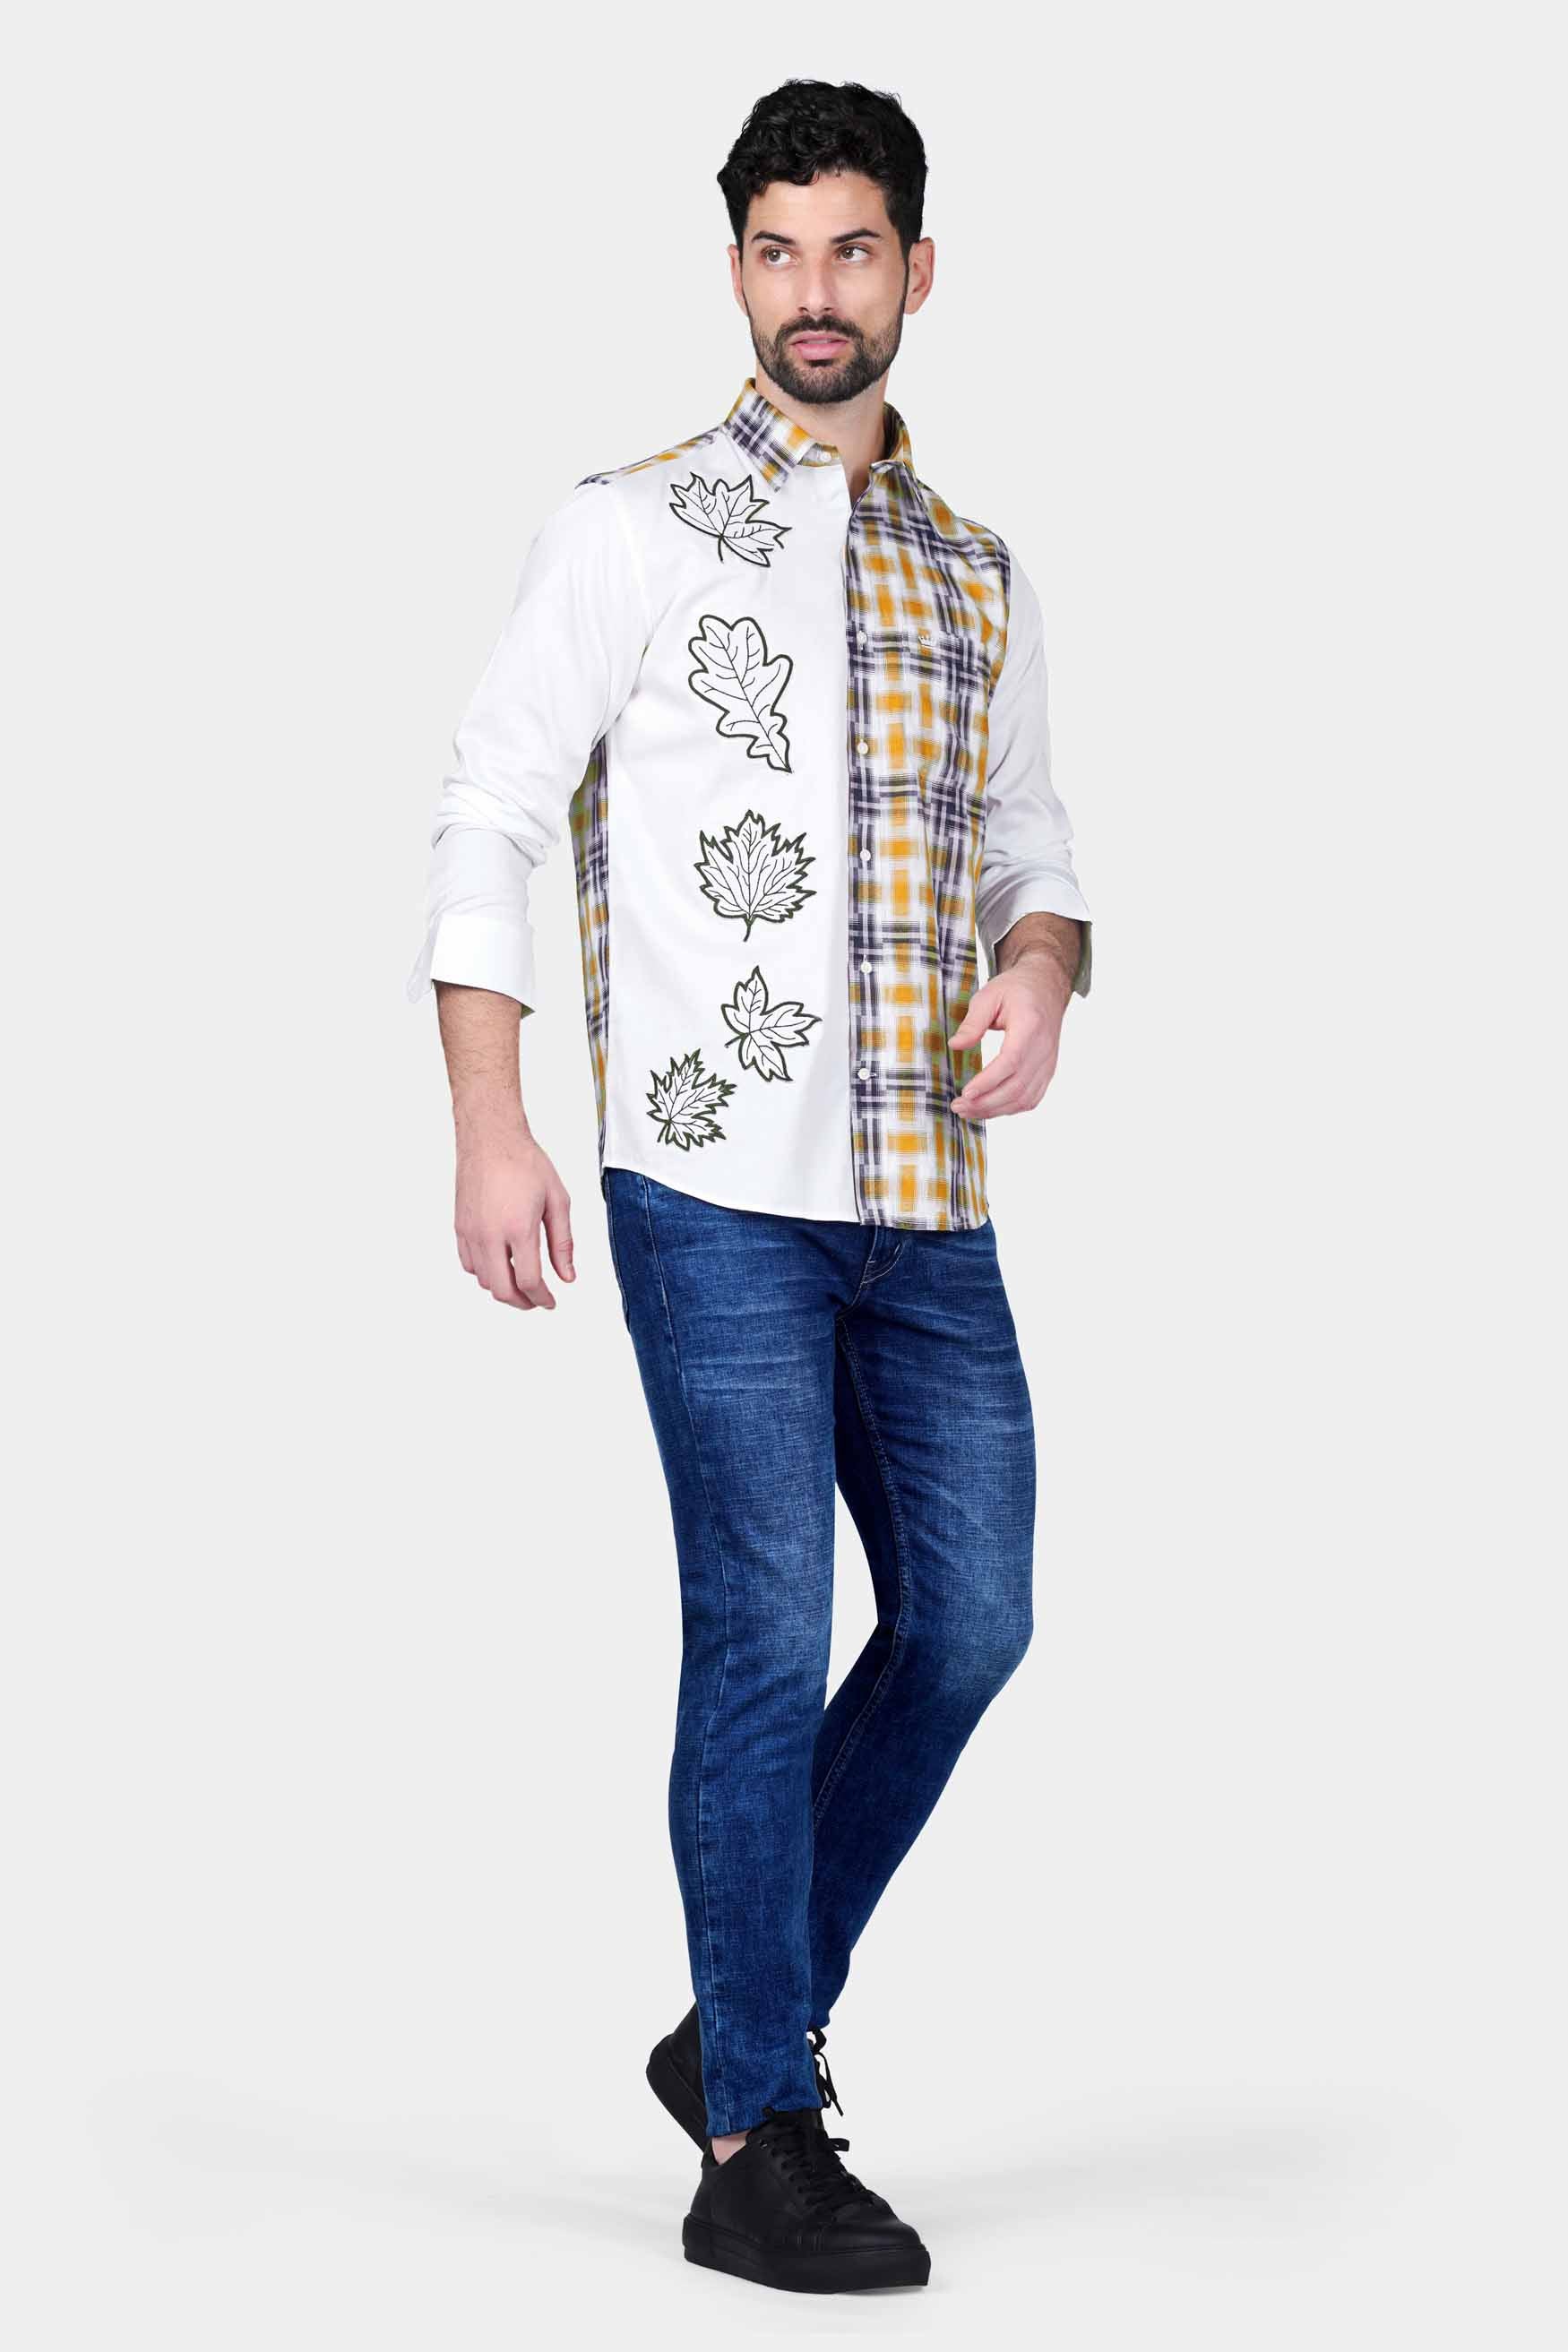 Bright White Leaves Embroidered with Muesli Brown and Midnight Blue Twill Premium Cotton Designer Shirt 6650-D5-E338-38, 6650-D5-E338-H-38, 6650-D5-E338-39, 6650-D5-E338-H-39, 6650-D5-E338-40, 6650-D5-E338-H-40, 6650-D5-E338-42, 6650-D5-E338-H-42, 6650-D5-E338-44, 6650-D5-E338-H-44, 6650-D5-E338-46, 6650-D5-E338-H-46, 6650-D5-E338-48, 6650-D5-E338-H-48, 6650-D5-E338-50, 6650-D5-E338-H-50, 6650-D5-E338-52, 6650-D5-E338-H-52